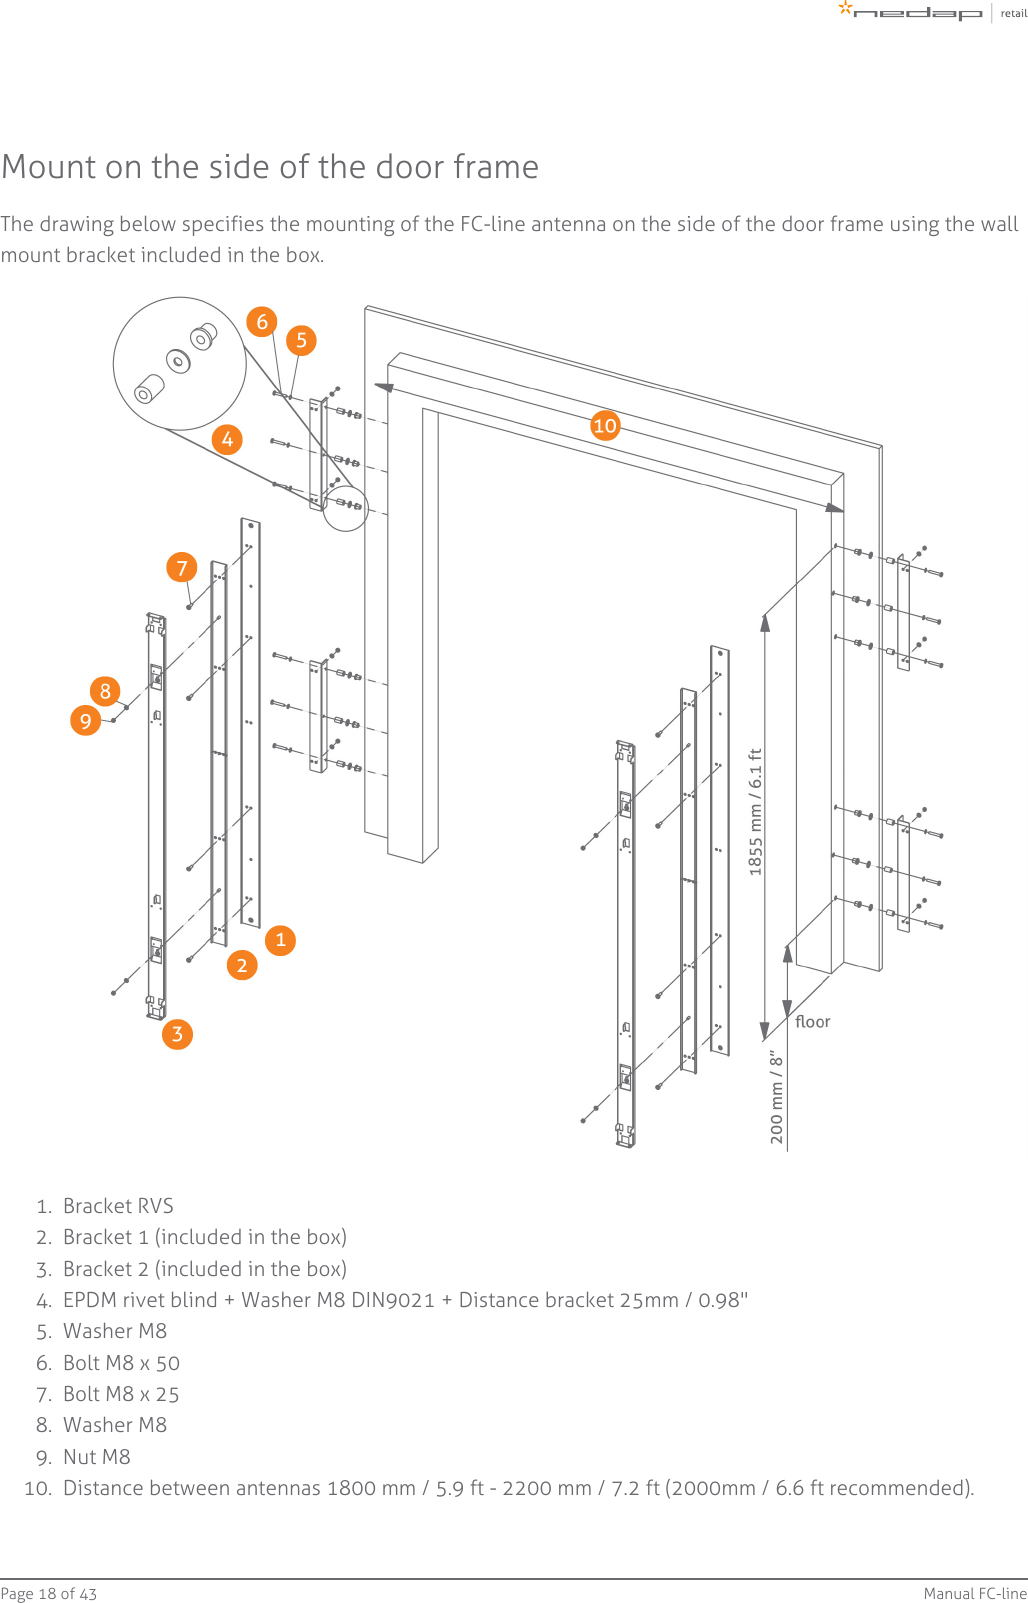 Page   of 18 43 Manual FC-line1.  2.  3.  4.  5.  6.  7.  8.  9.  10.  Mount on the side of the door frameThe drawing below specifies the mounting of the FC-line antenna on the side of the door frame using the wallmount bracket included in the box.Bracket RVSBracket 1 (included in the box)Bracket 2 (included in the box)EPDM rivet blind + Washer M8 DIN9021 + Distance bracket 25mm / 0.98&quot;Washer M8Bolt M8 x 50Bolt M8 x 25Washer M8Nut M8Distance between antennas 1800 mm / 5.9 ft - 2200 mm / 7.2 ft (2000mm / 6.6 ft recommended).